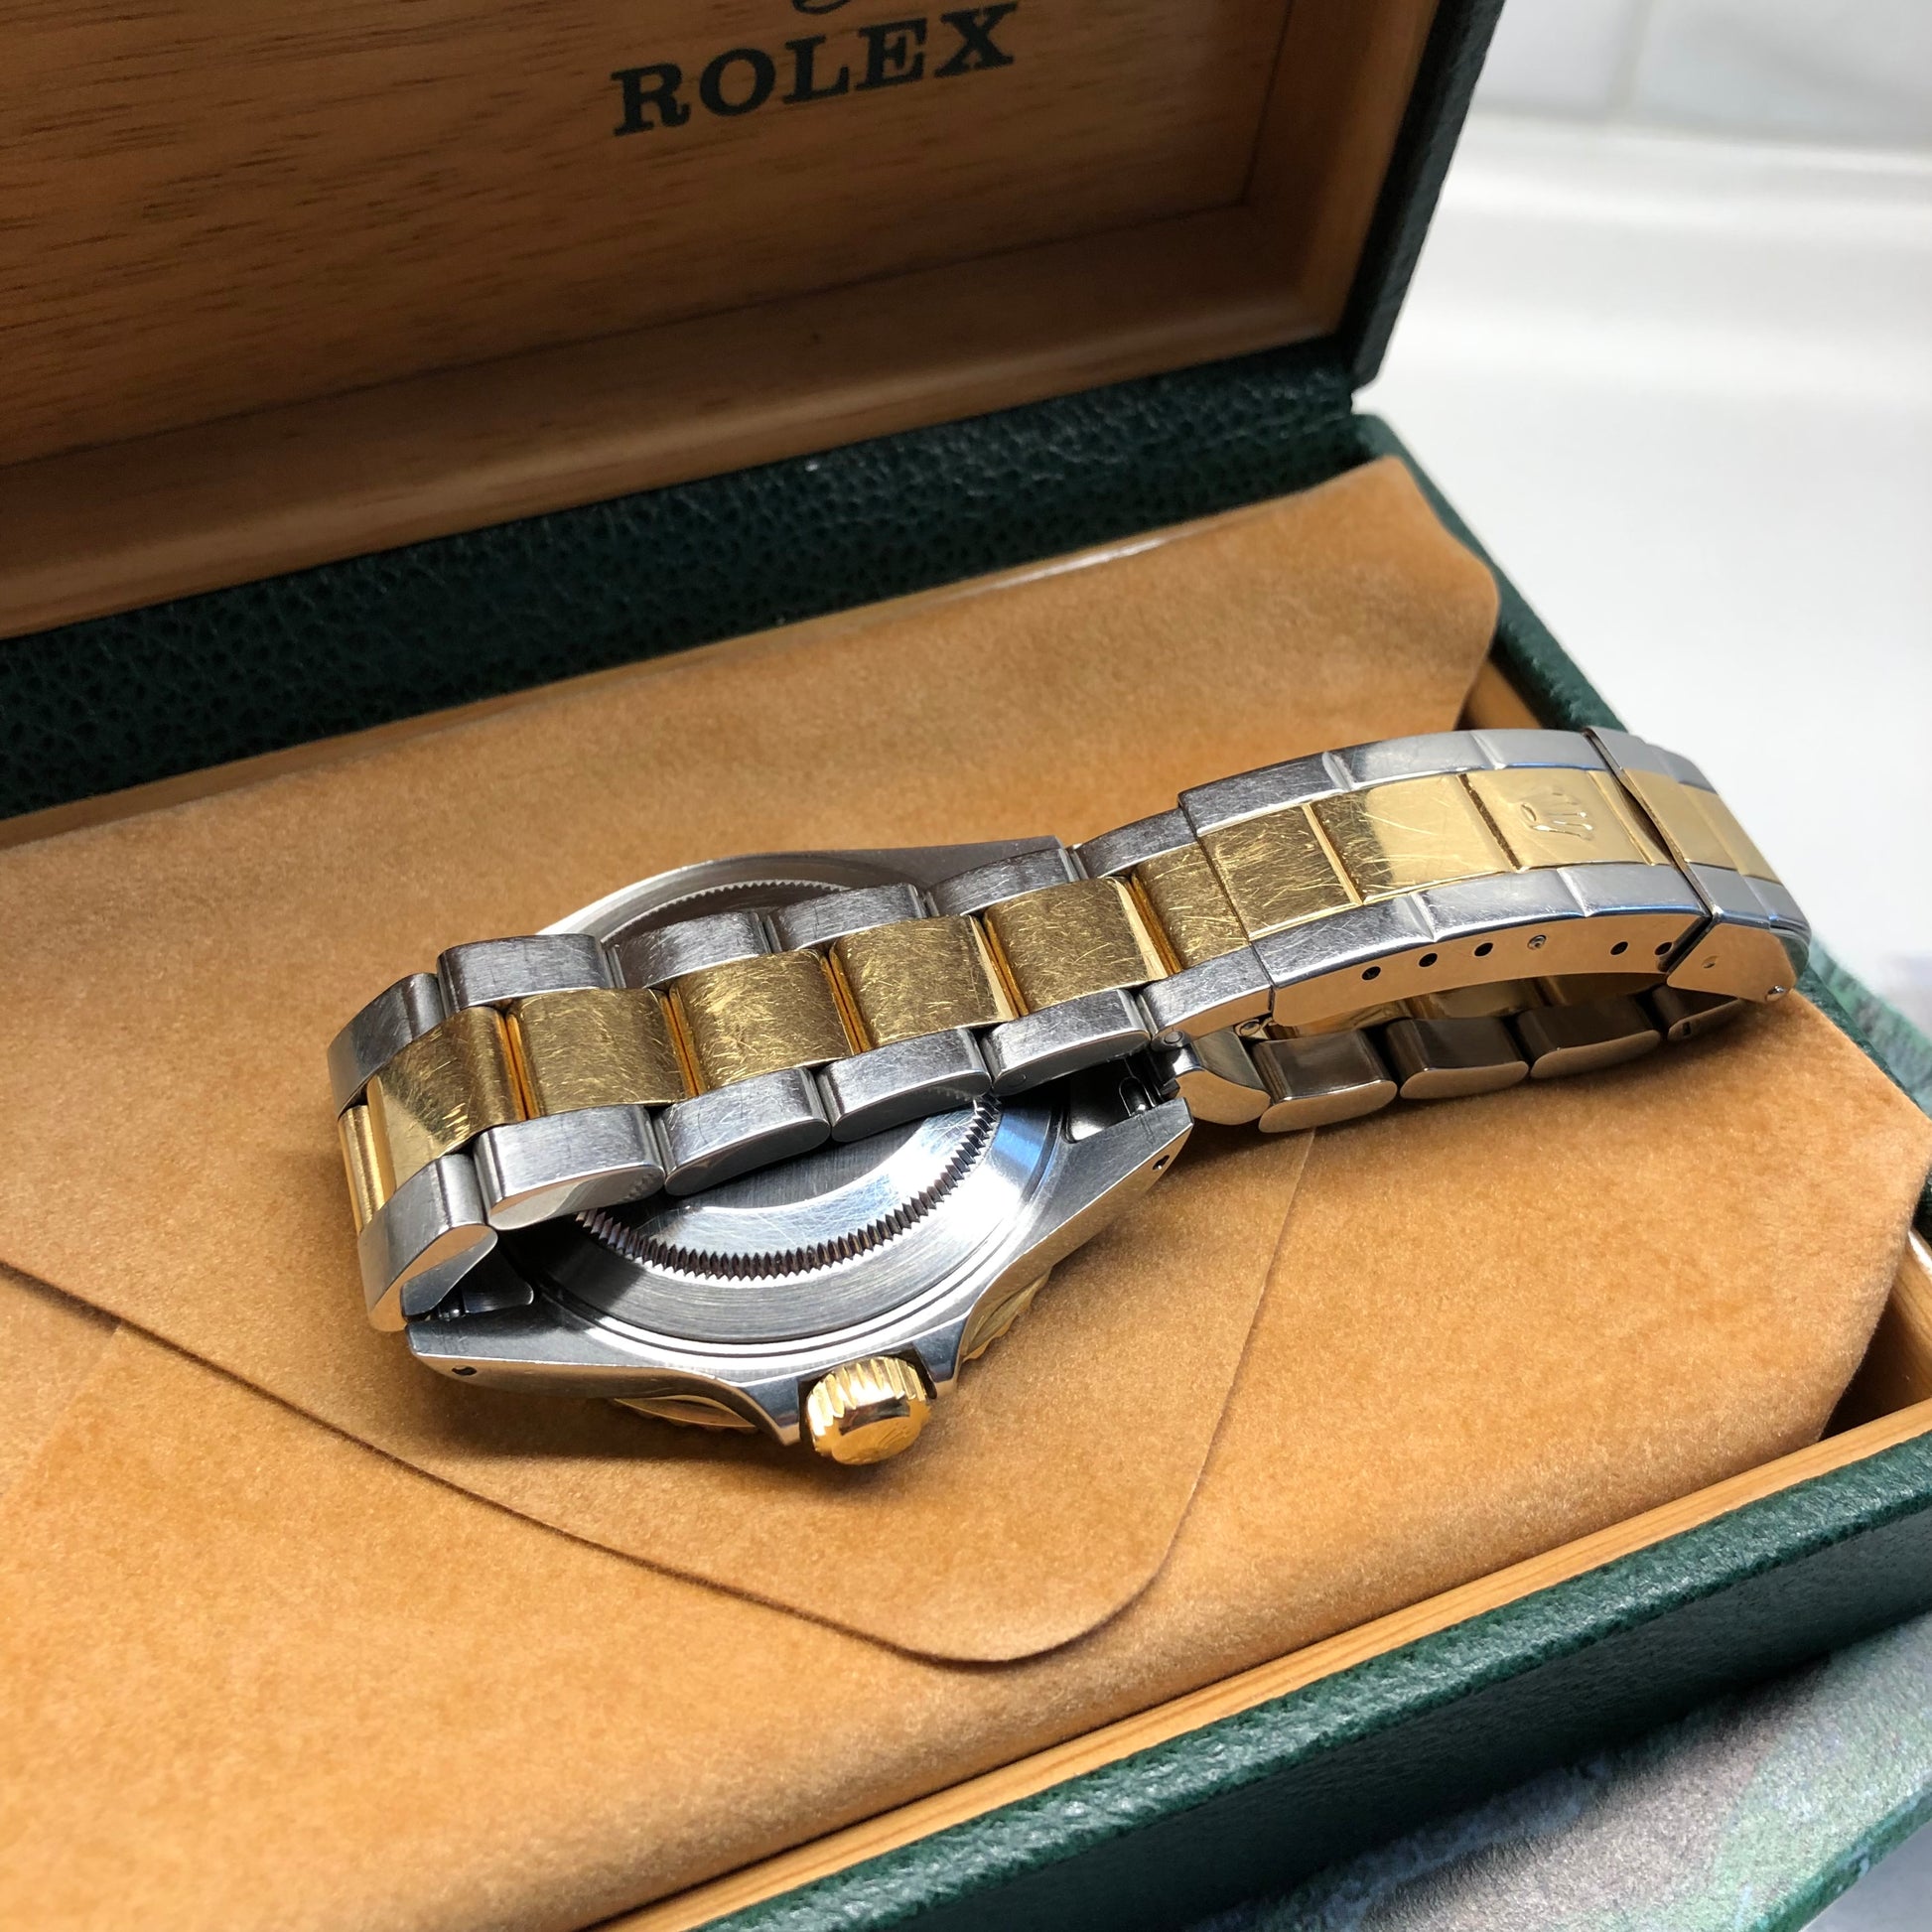 At Auction: ROLEX SUBMARINER OYSTER PERPETUAL WRIST WATCH IOB